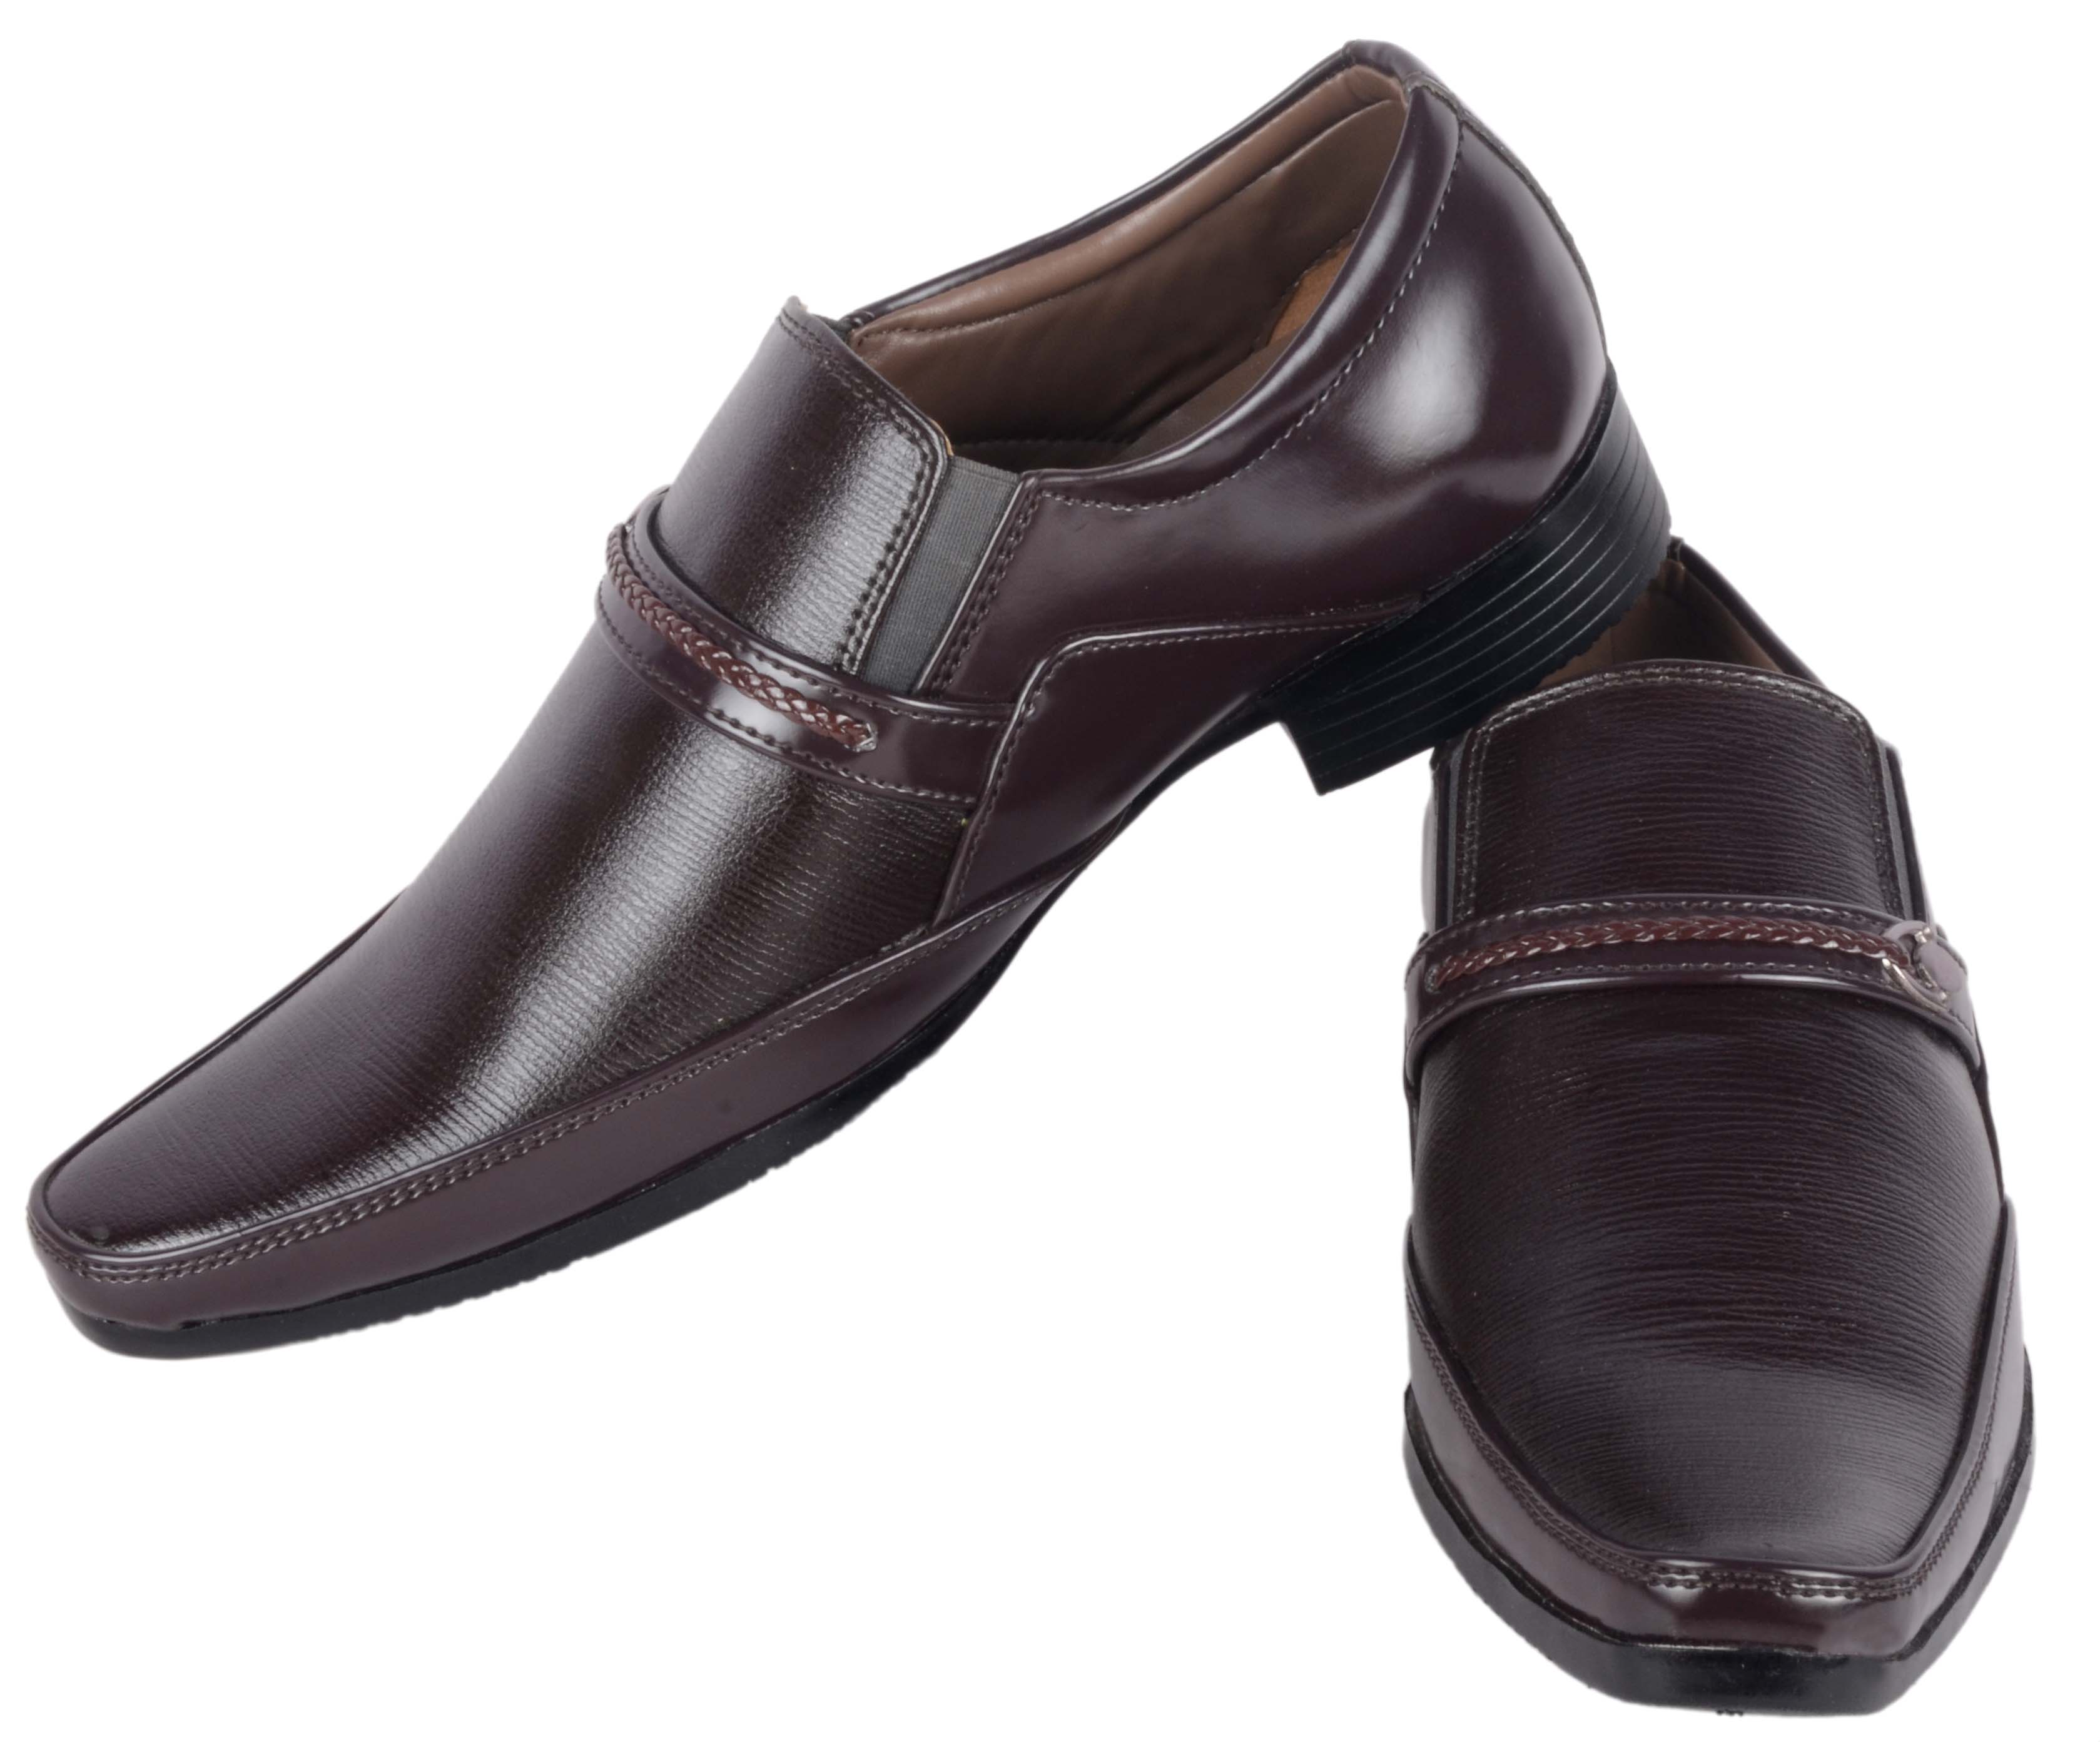 Buy Austrich Brown Formal Slip-on Shoes Online @ ₹569 from ShopClues